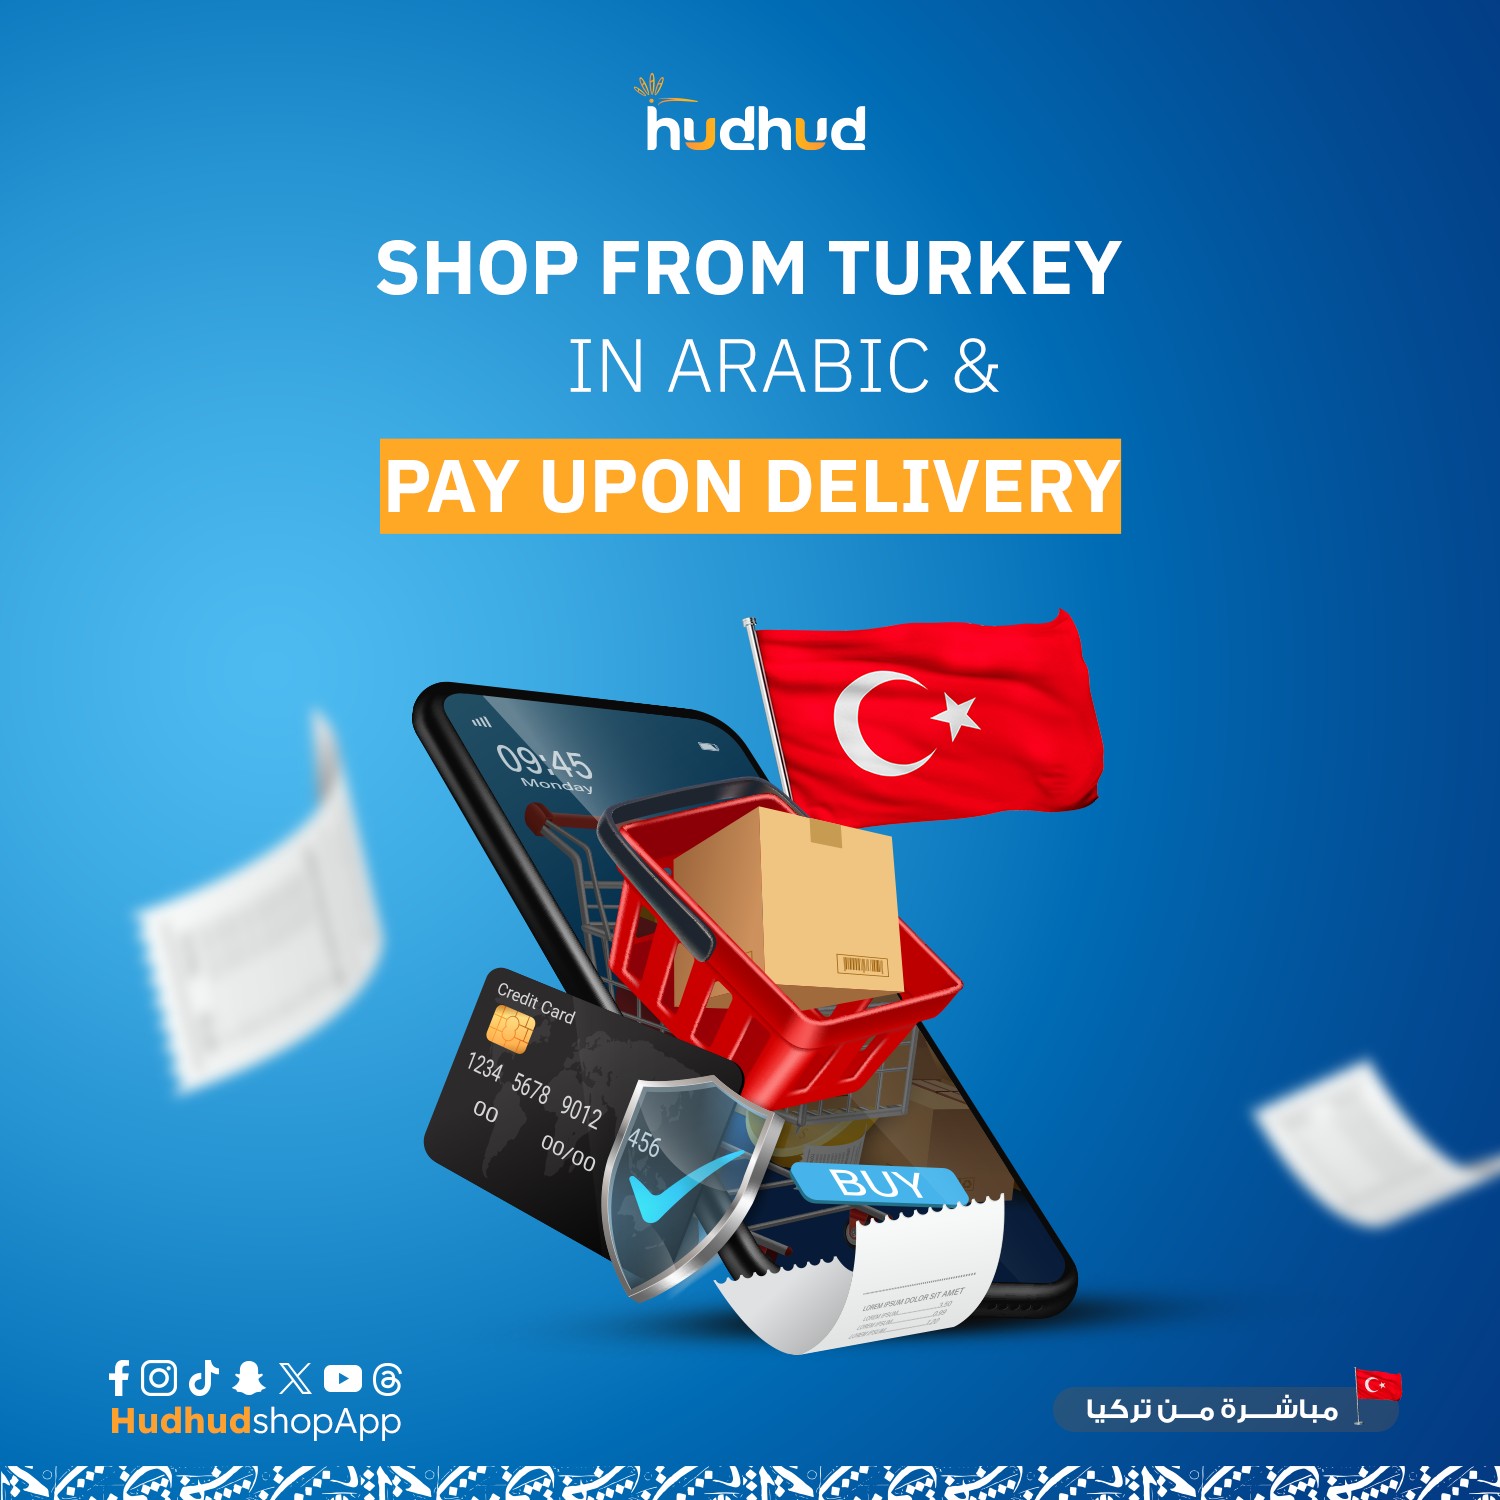 hodhod-shop-the-best-turkish-website-allows-payment-upon-delivery